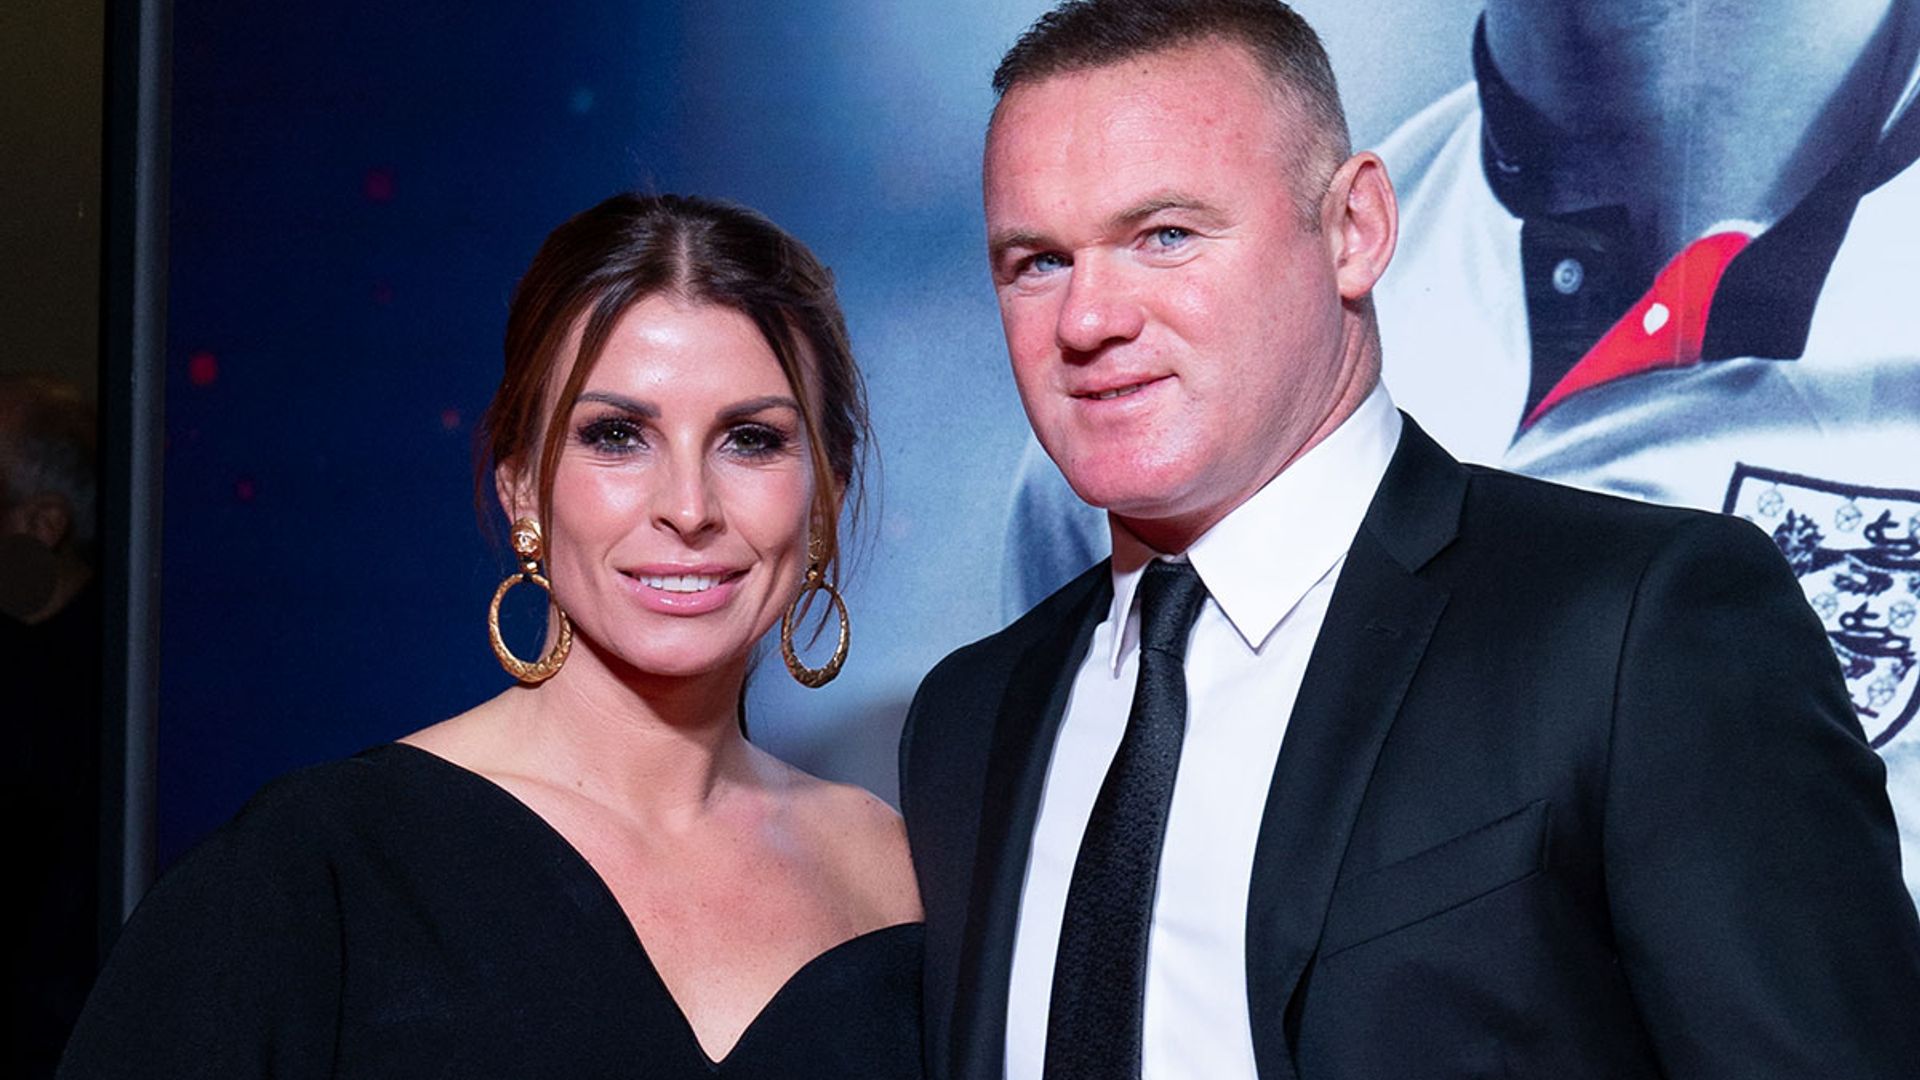 Wayne and Coleen Rooney make rare glamorous red carpet appearance